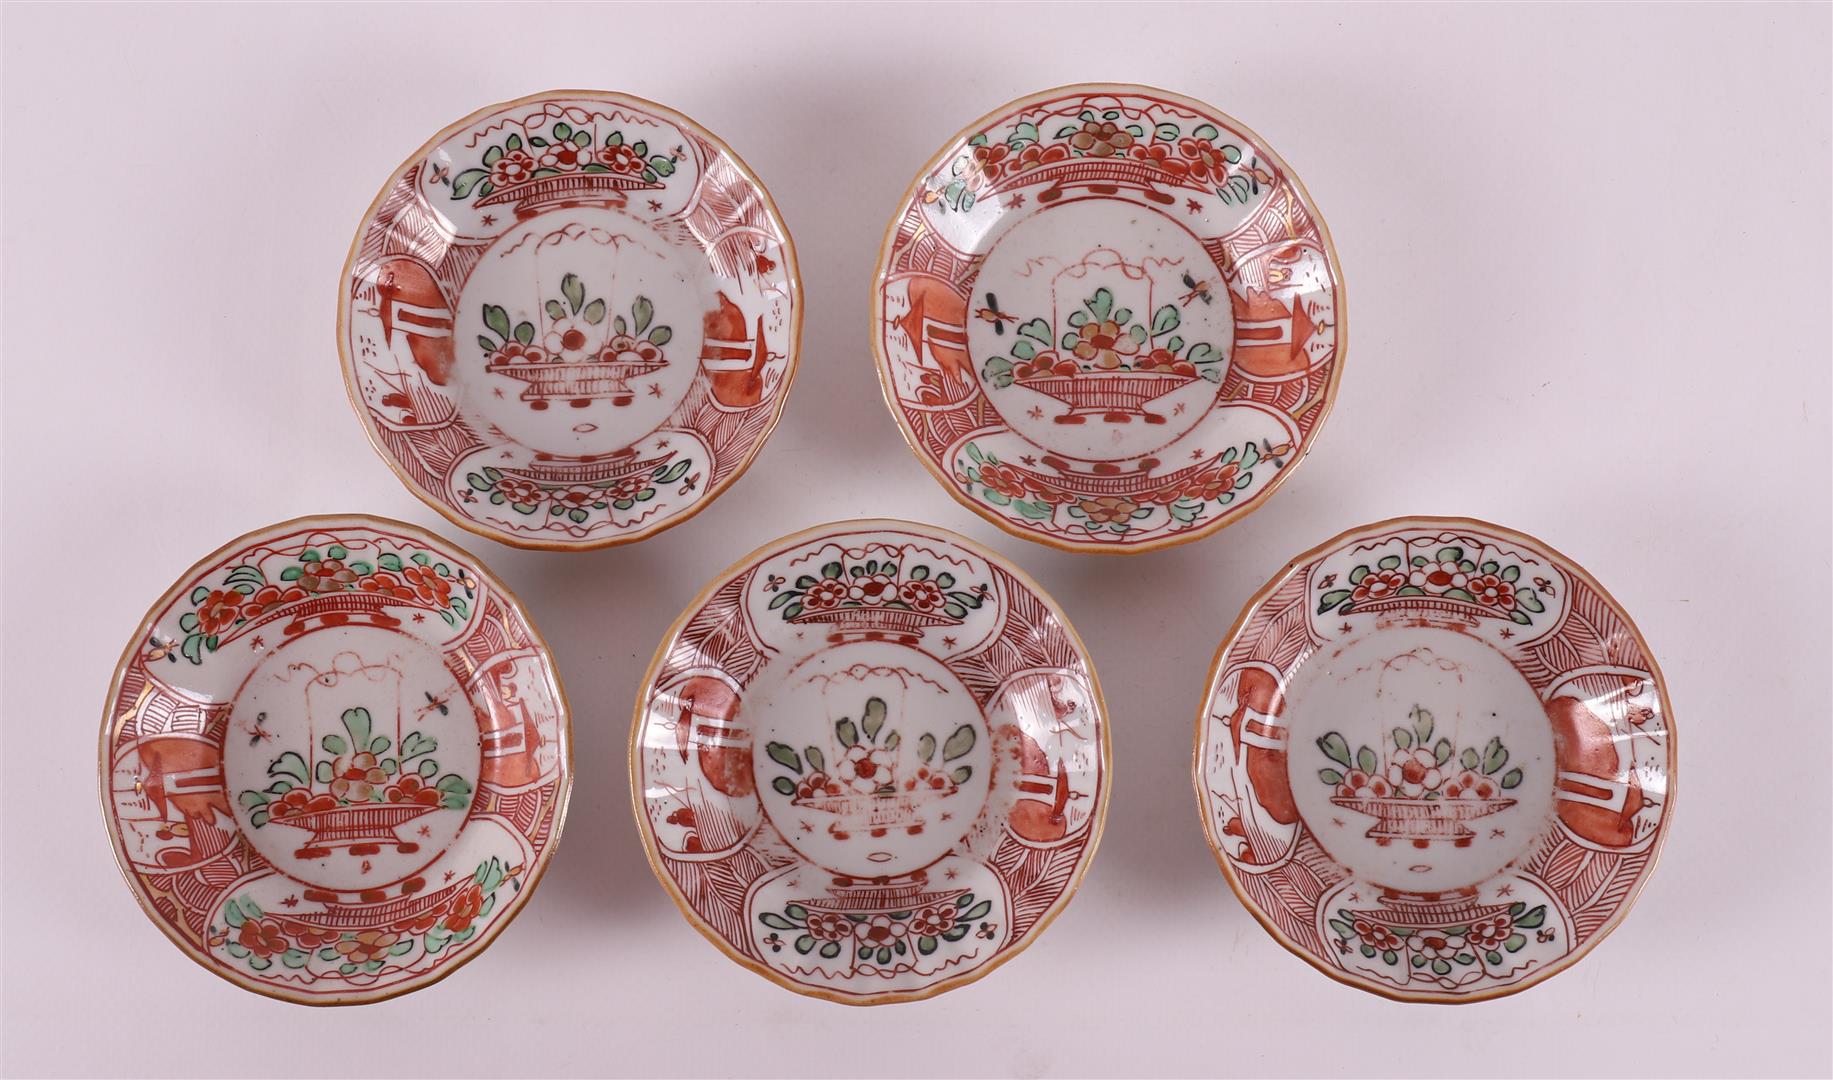 An Amsterdam colorful porcelain bowl, China, Qianglong, 18th century. Polychrome decoration of - Image 9 of 20